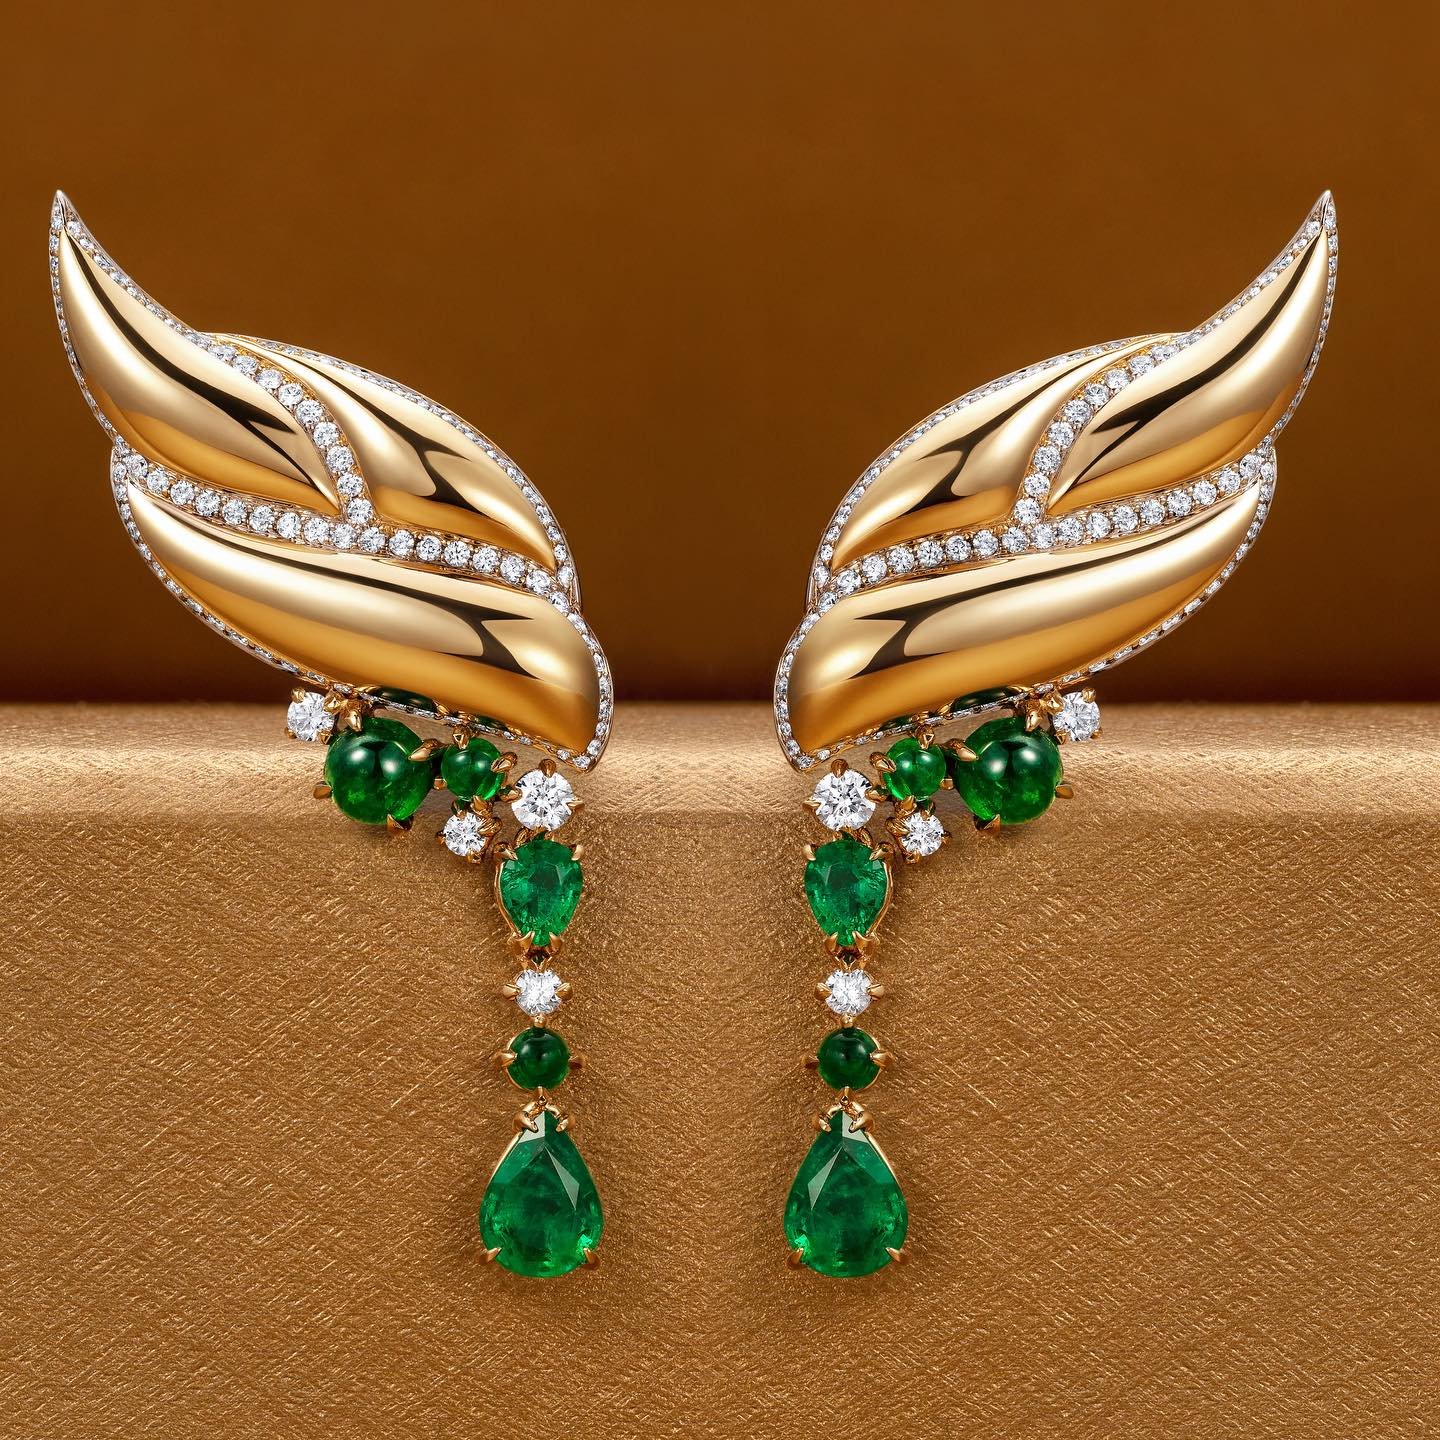 The Falcon earrings - golden feathers arch up the lobe with cascading Zambian emeralds and diamonds from their ends. 

*The Falcon, a global symbol of power, strength, and courage.
In African spirituality, a network of diverse beliefs, often associat